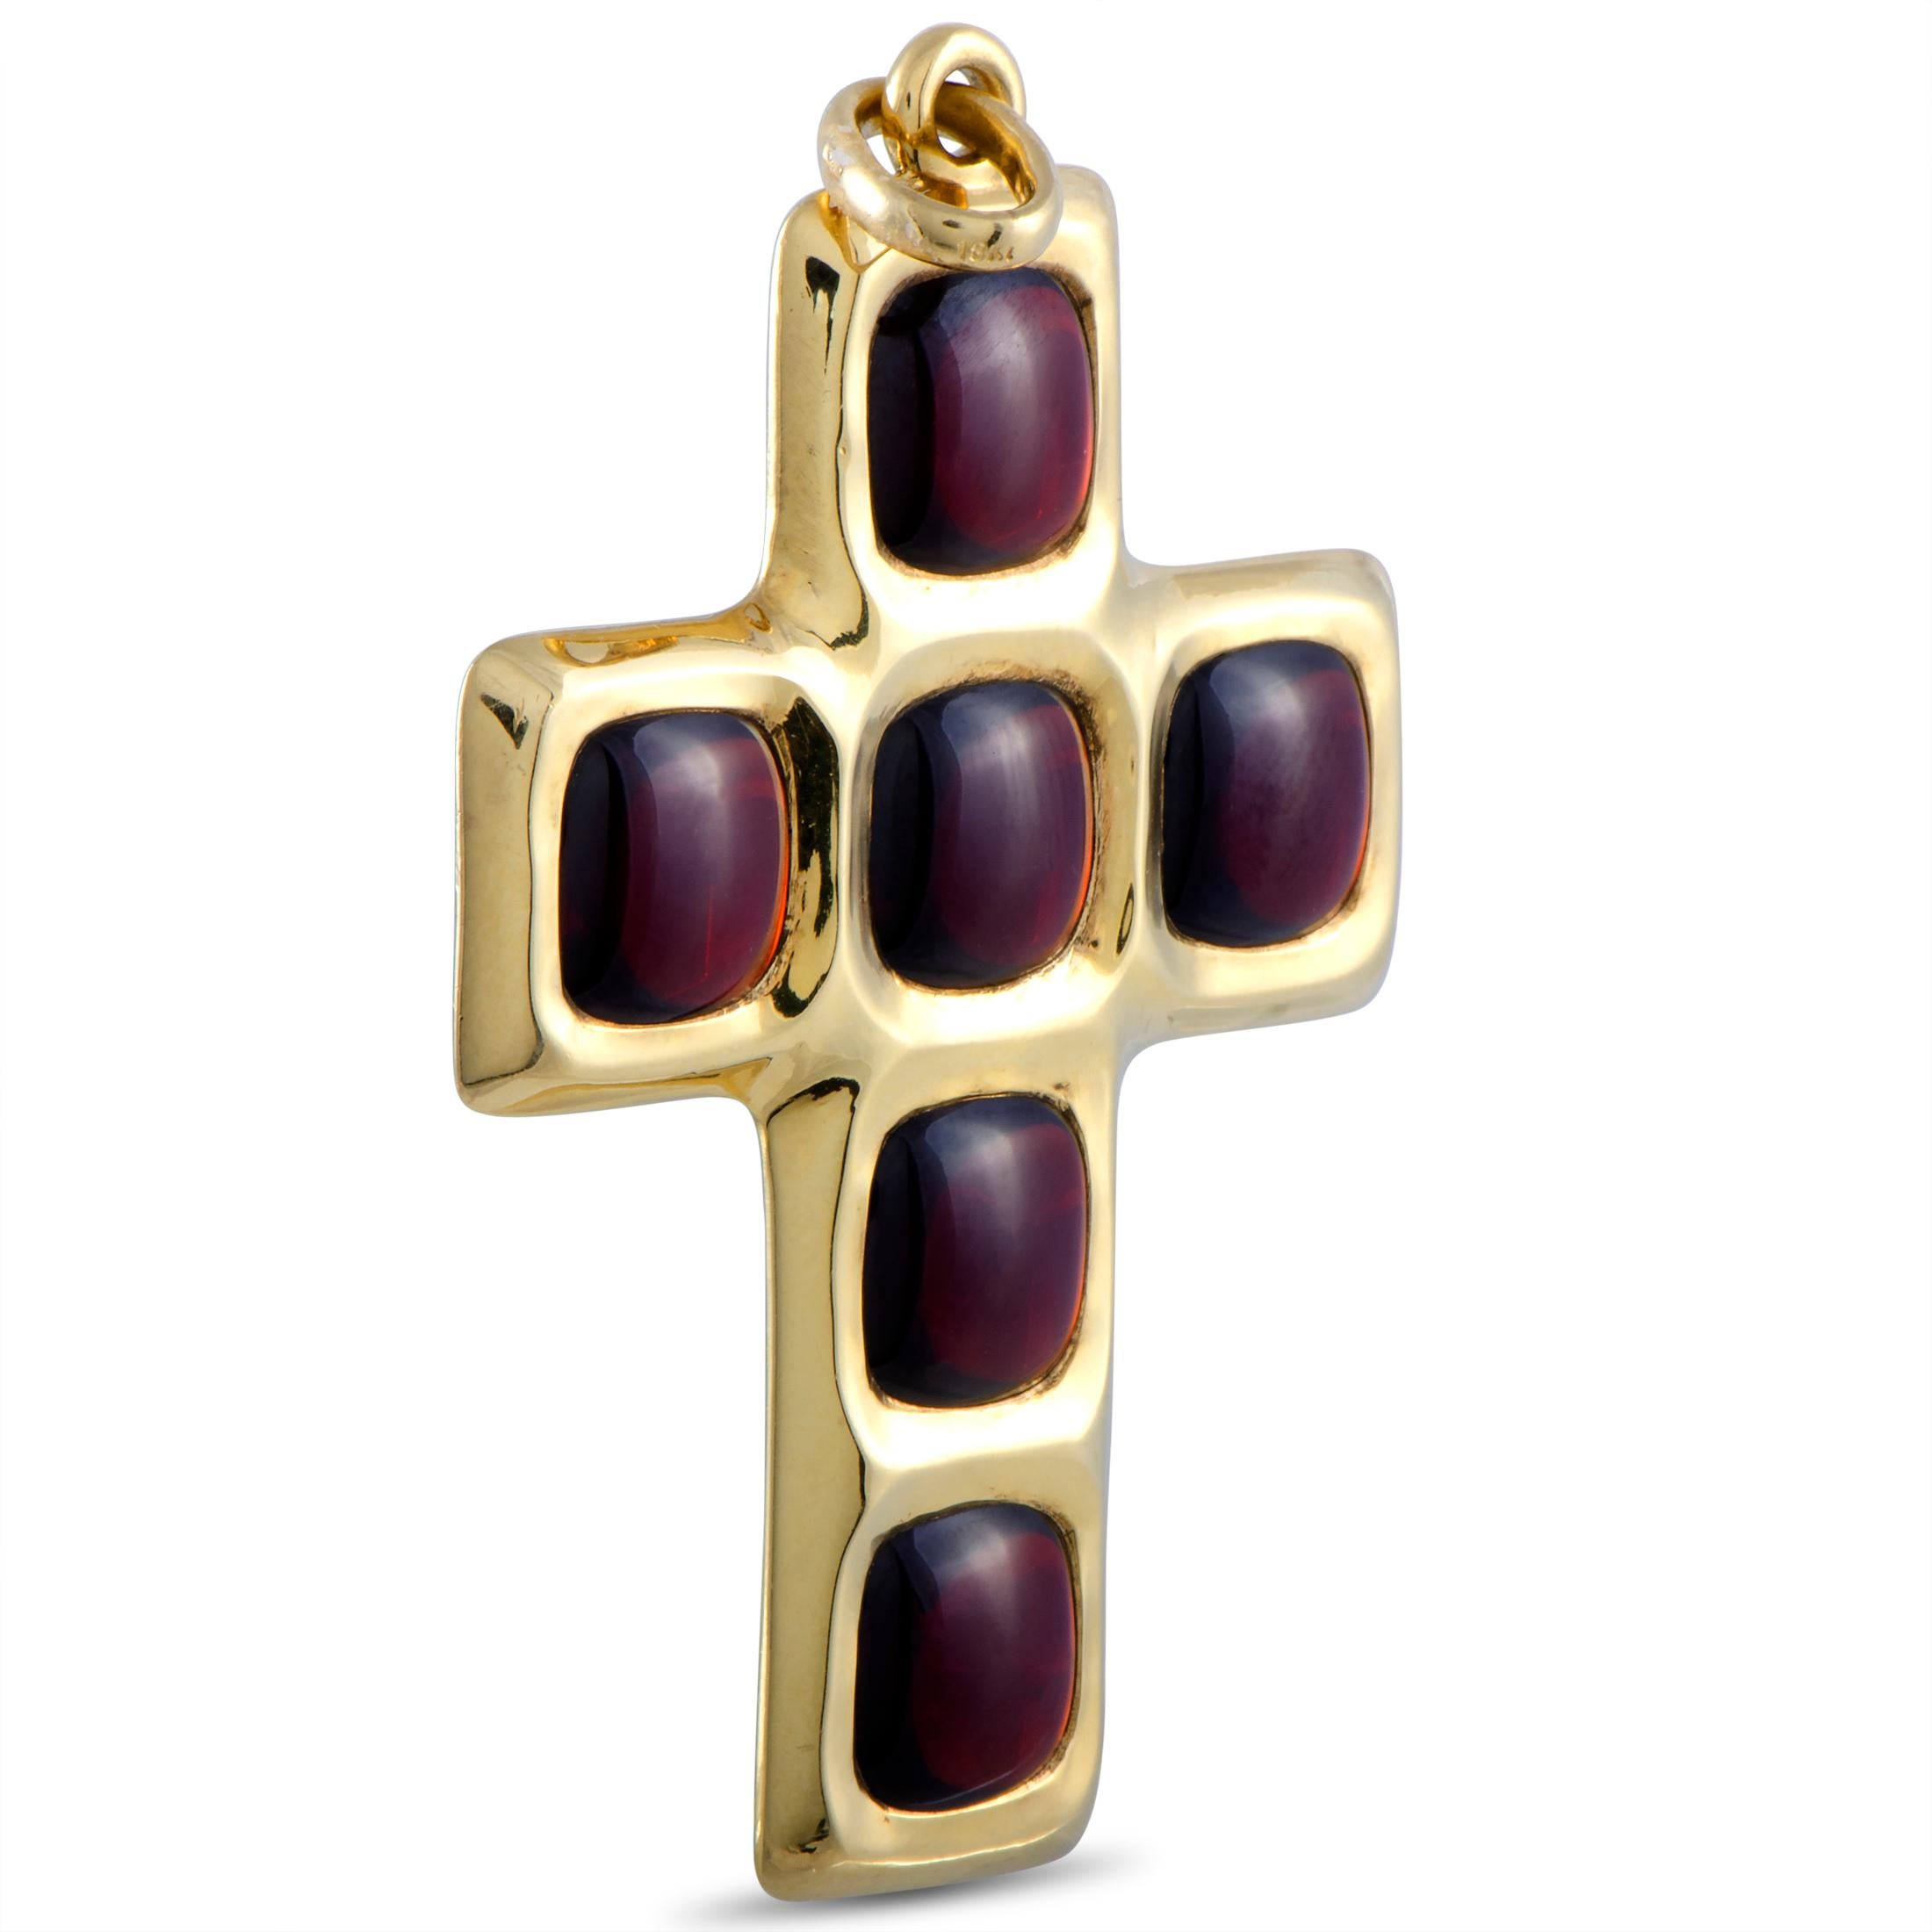 This stunning cross pendant is a Pomellato design that combines the luxurious allure of gold with the compelling beauty of the striking garnets. The pendant is expertly crafted from 18K yellow gold and it weighs 30.6 grams.
Included Items: